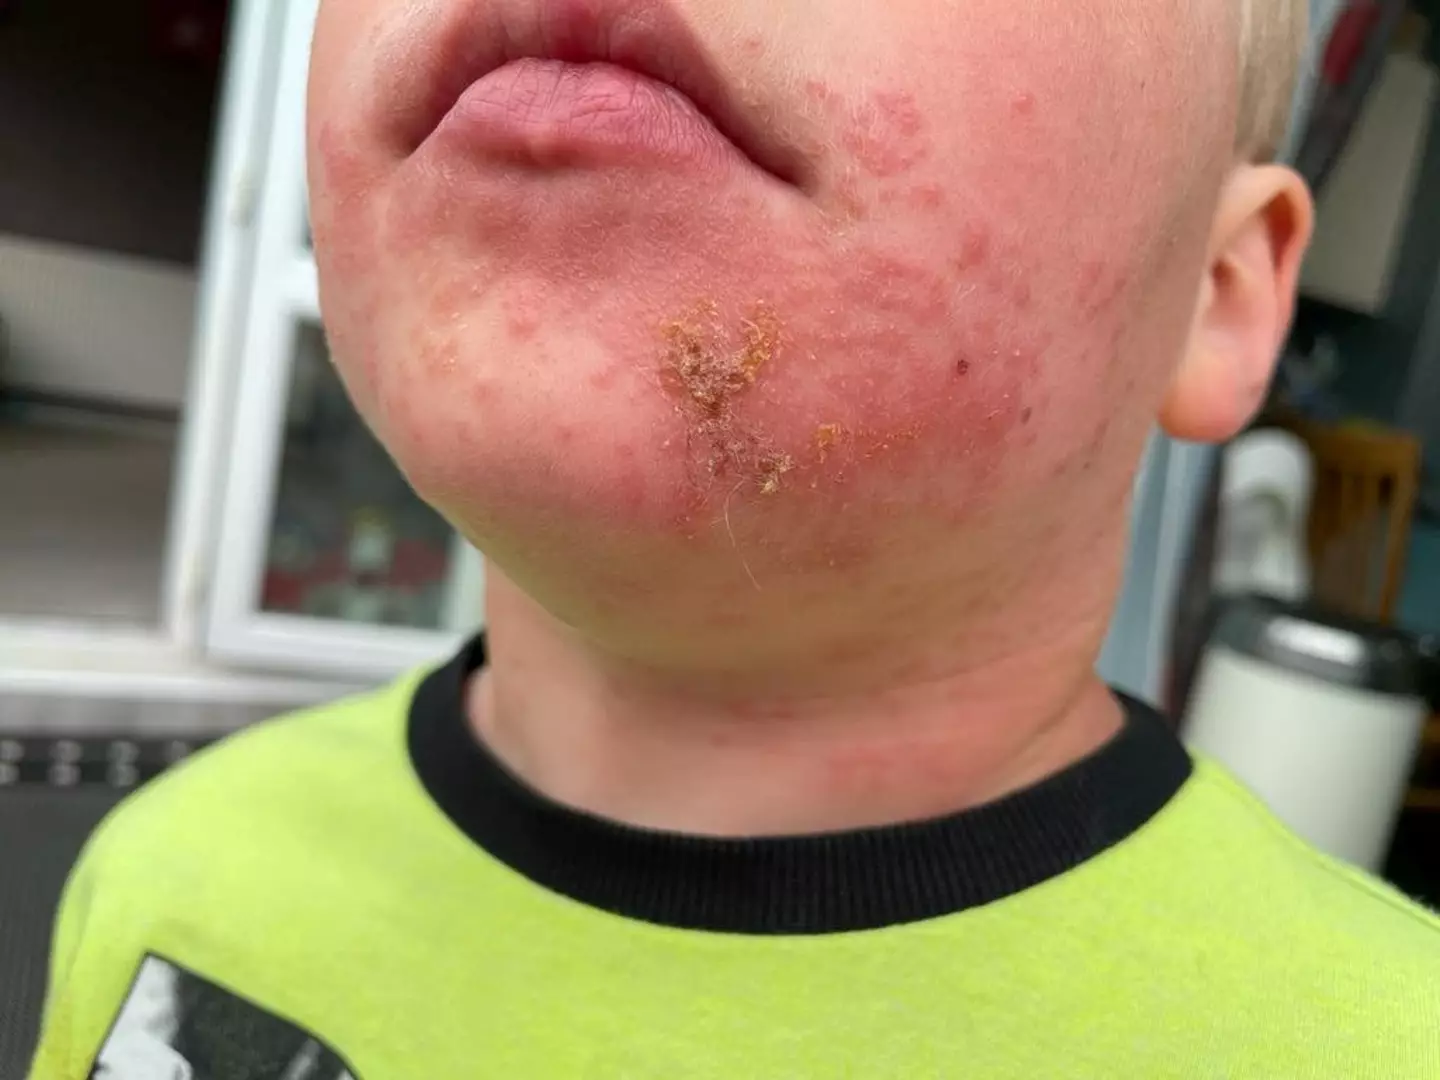 A mum has issued a warning to other parents after her toddler developed a severe rash (